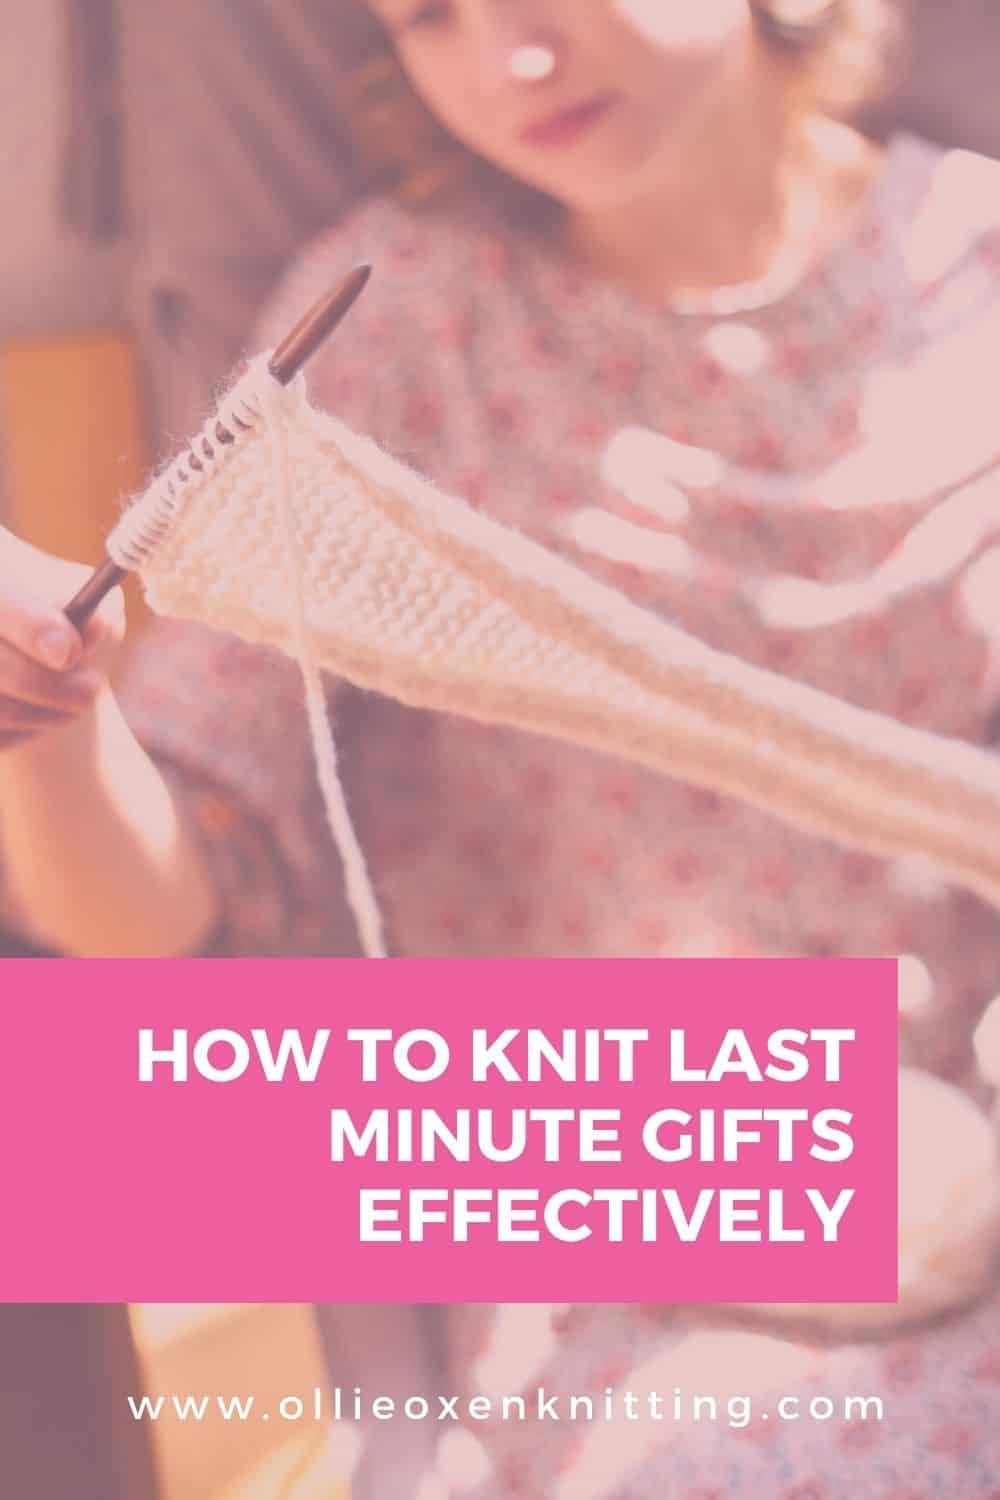 How To Knit Last Minute Gifts Effectively | Ollie Oxen Knitting